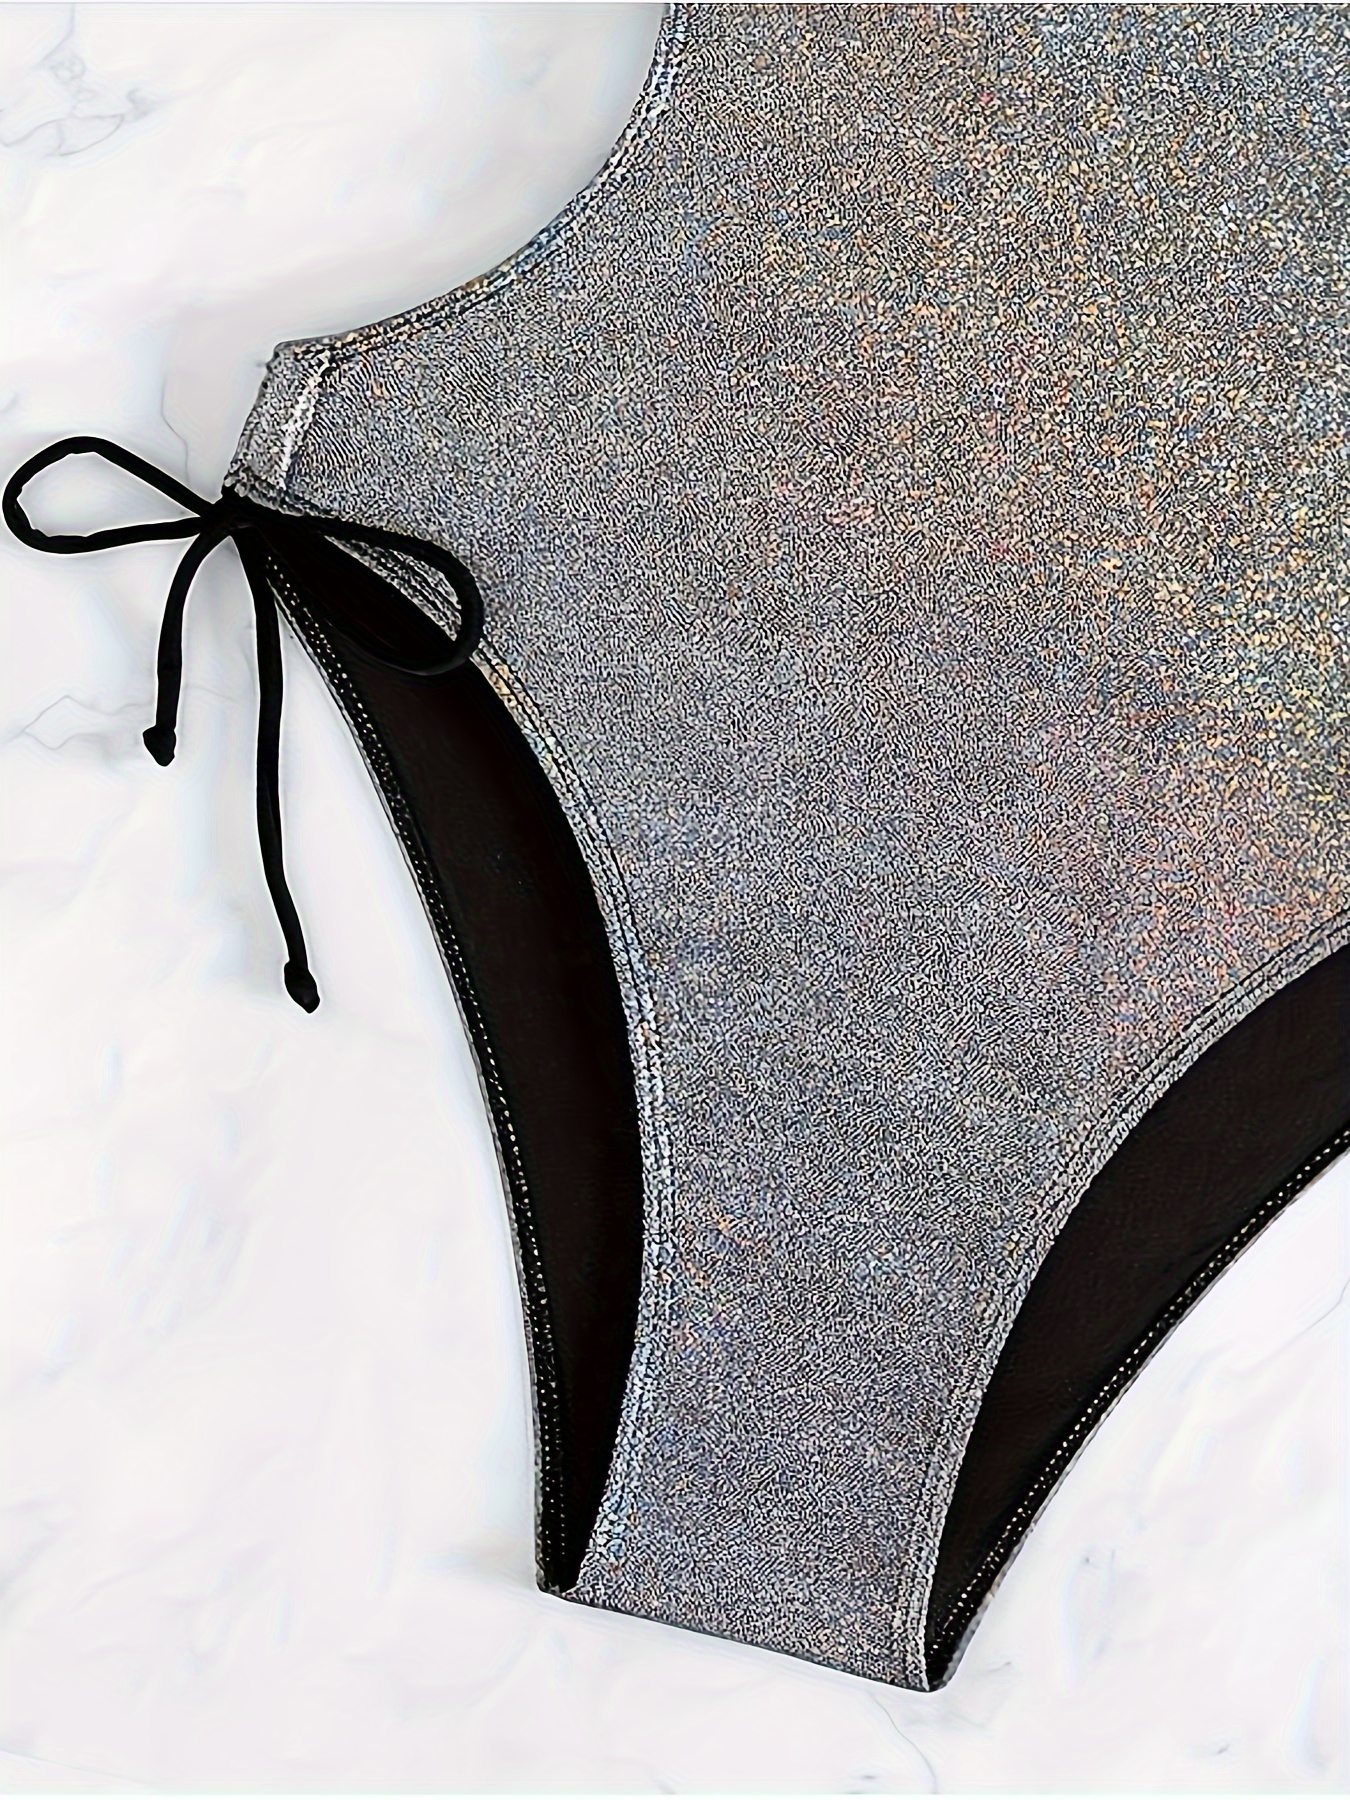 Silver Holographic Metallic One Piece Swimsuit, Plus Size Holographic  Bathing Suit, Glitter Plus Size Swimwear, Bikini One Piece Swimsuit 